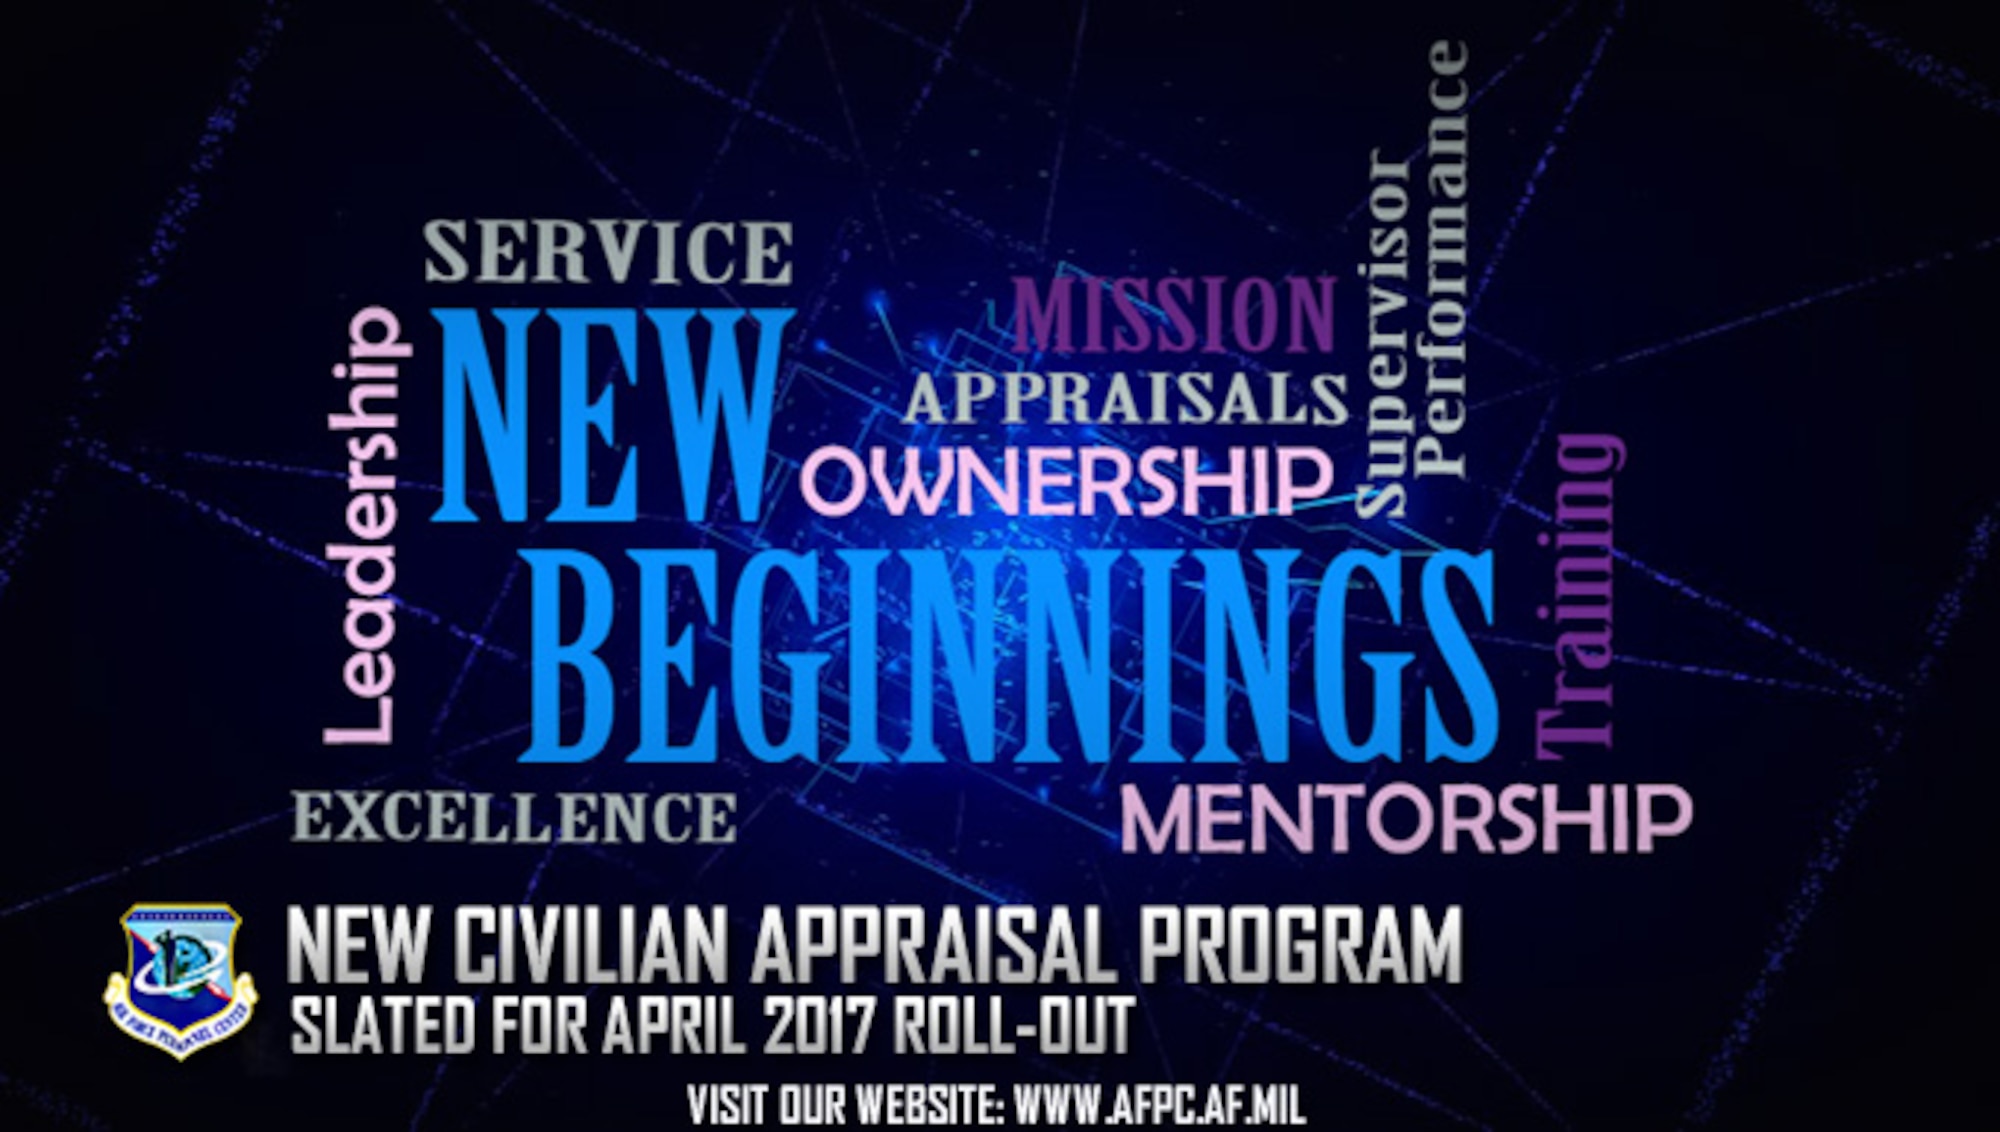 The Air Force will roll out a new civilian appraisal program in April that will link employee duties and performance to the organization’s mission and goals. (U.S. Air Force graphic by Staff Sgt. Alexx Pons)